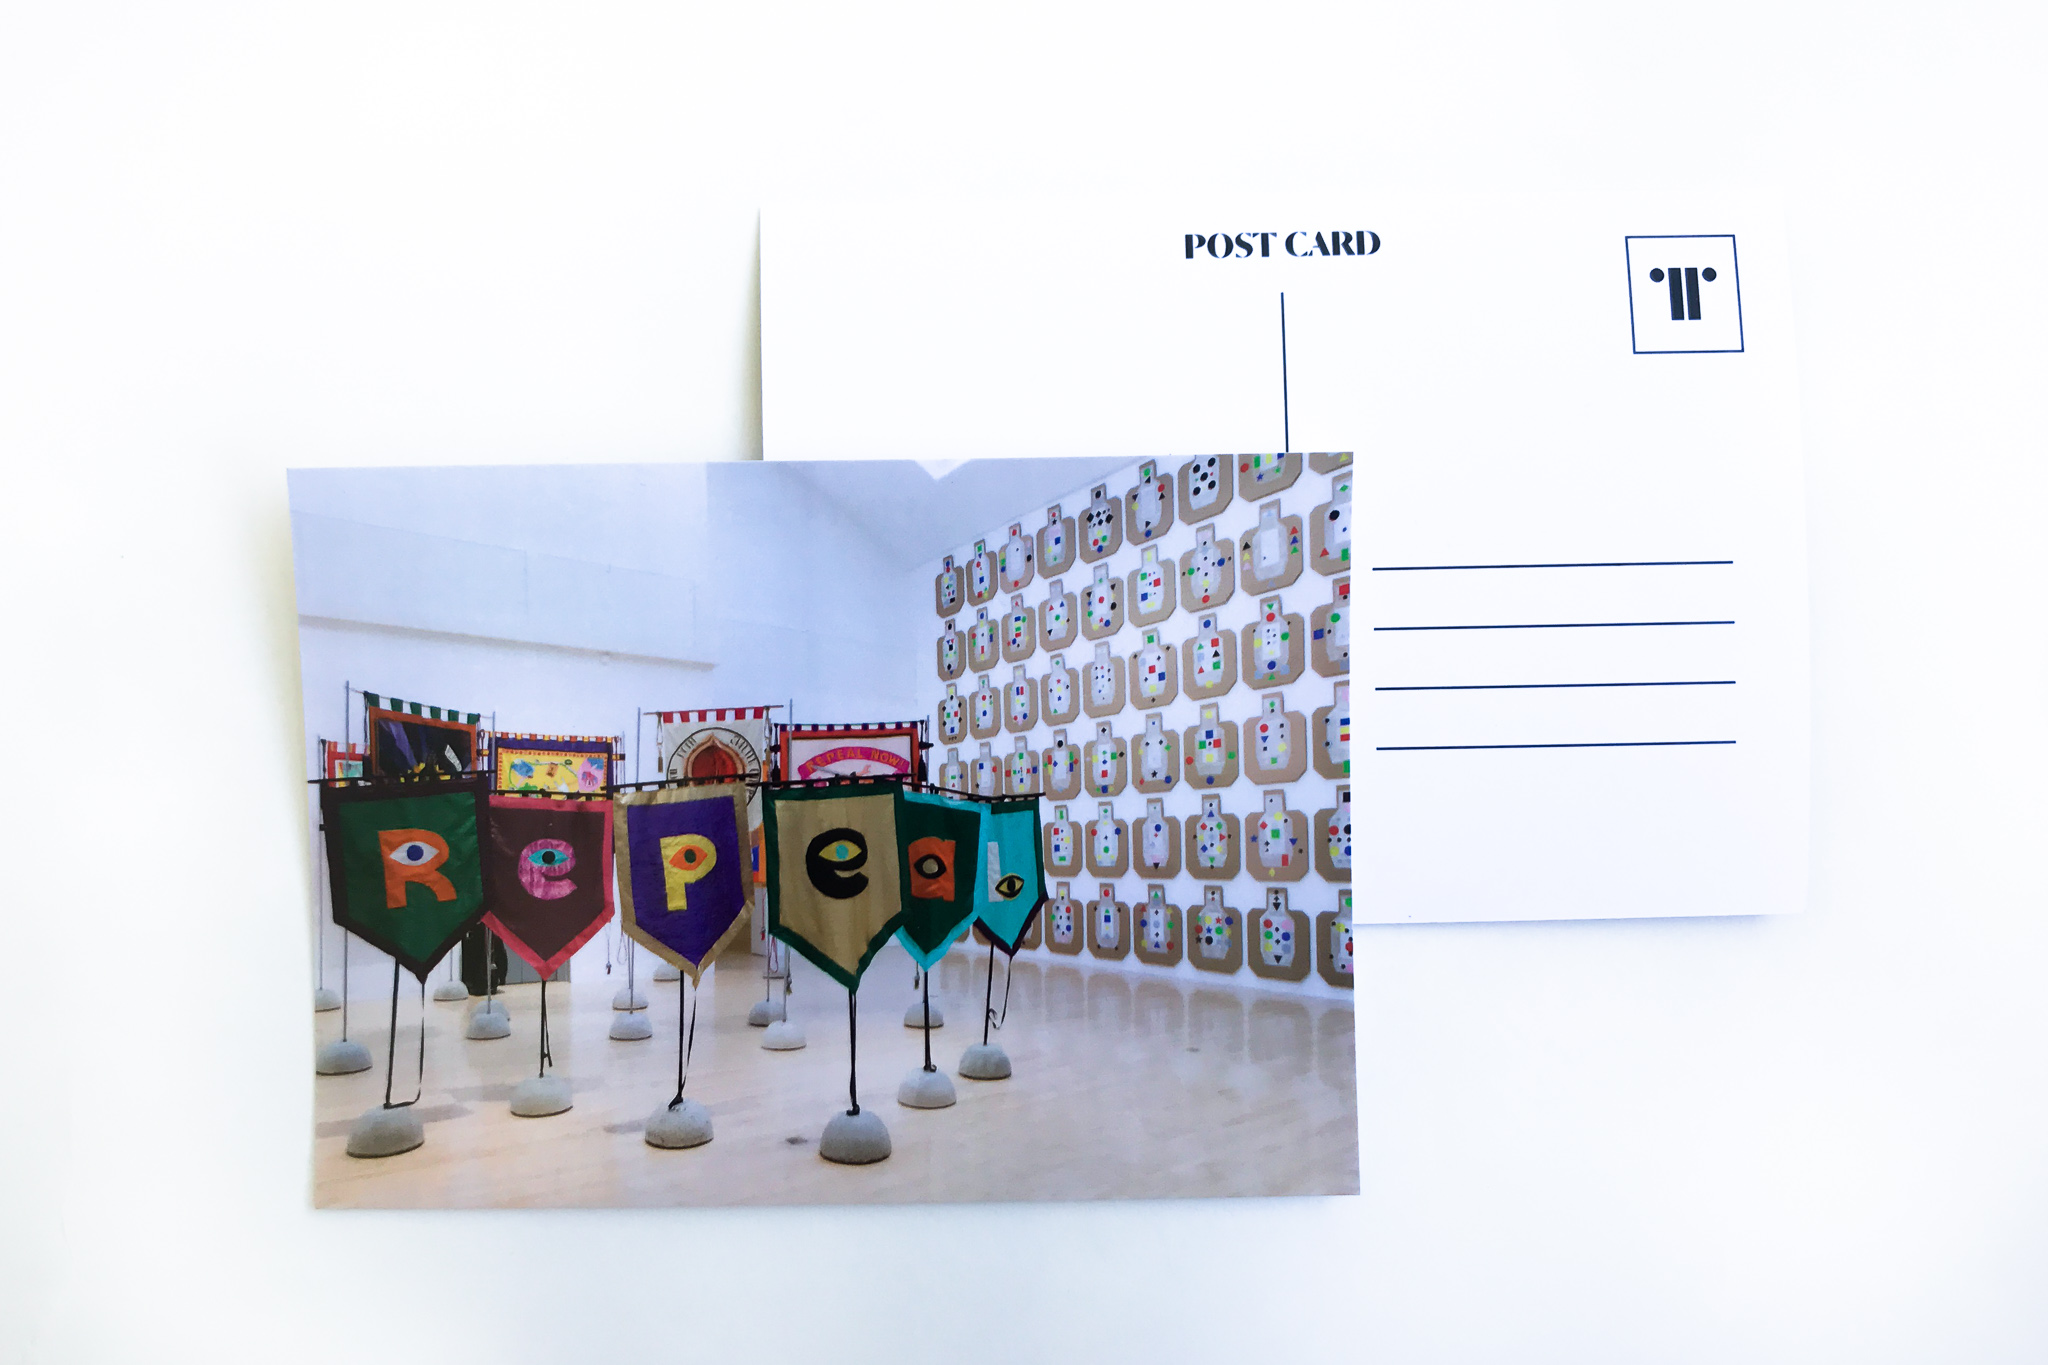 A5 postcard with image of 'Repeal the 8th' installation.